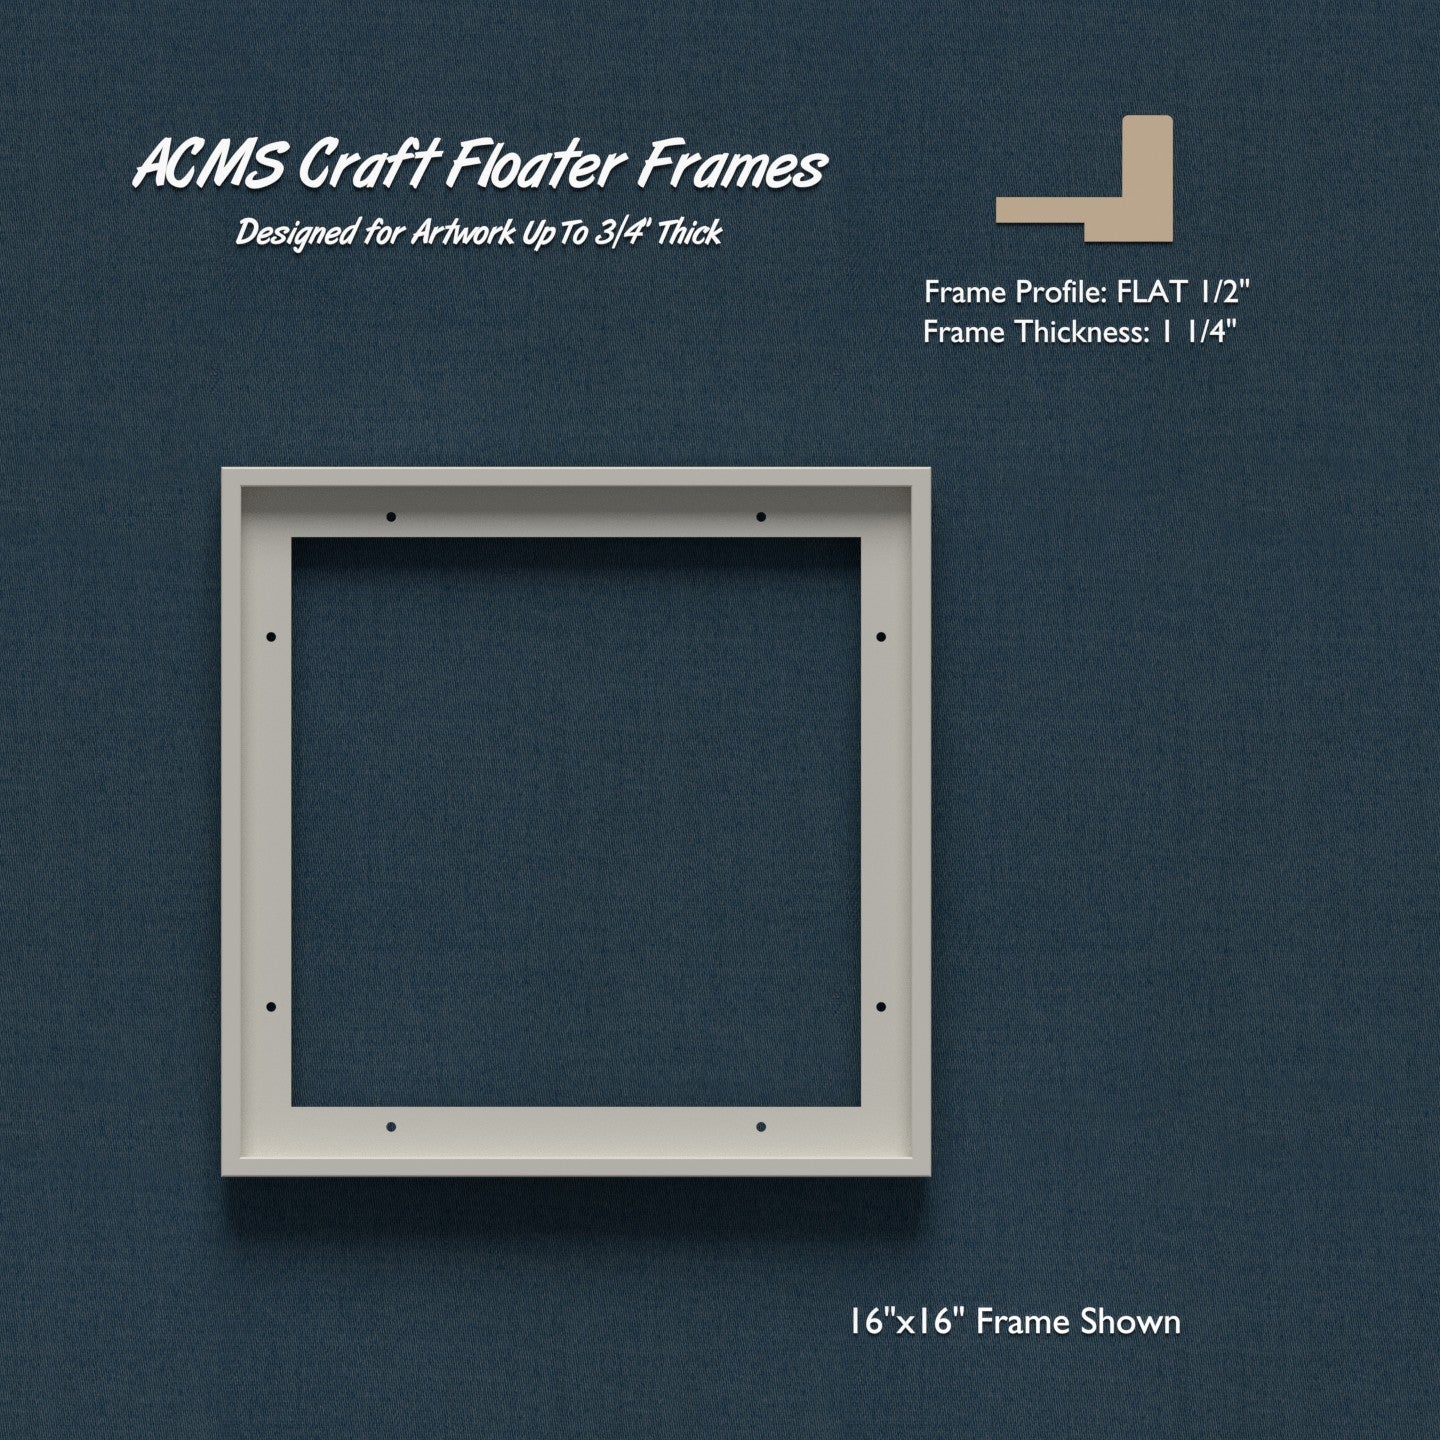 Square Craft Floater Frame - FLAT 1/2" Profile - 1 1/4" Thick